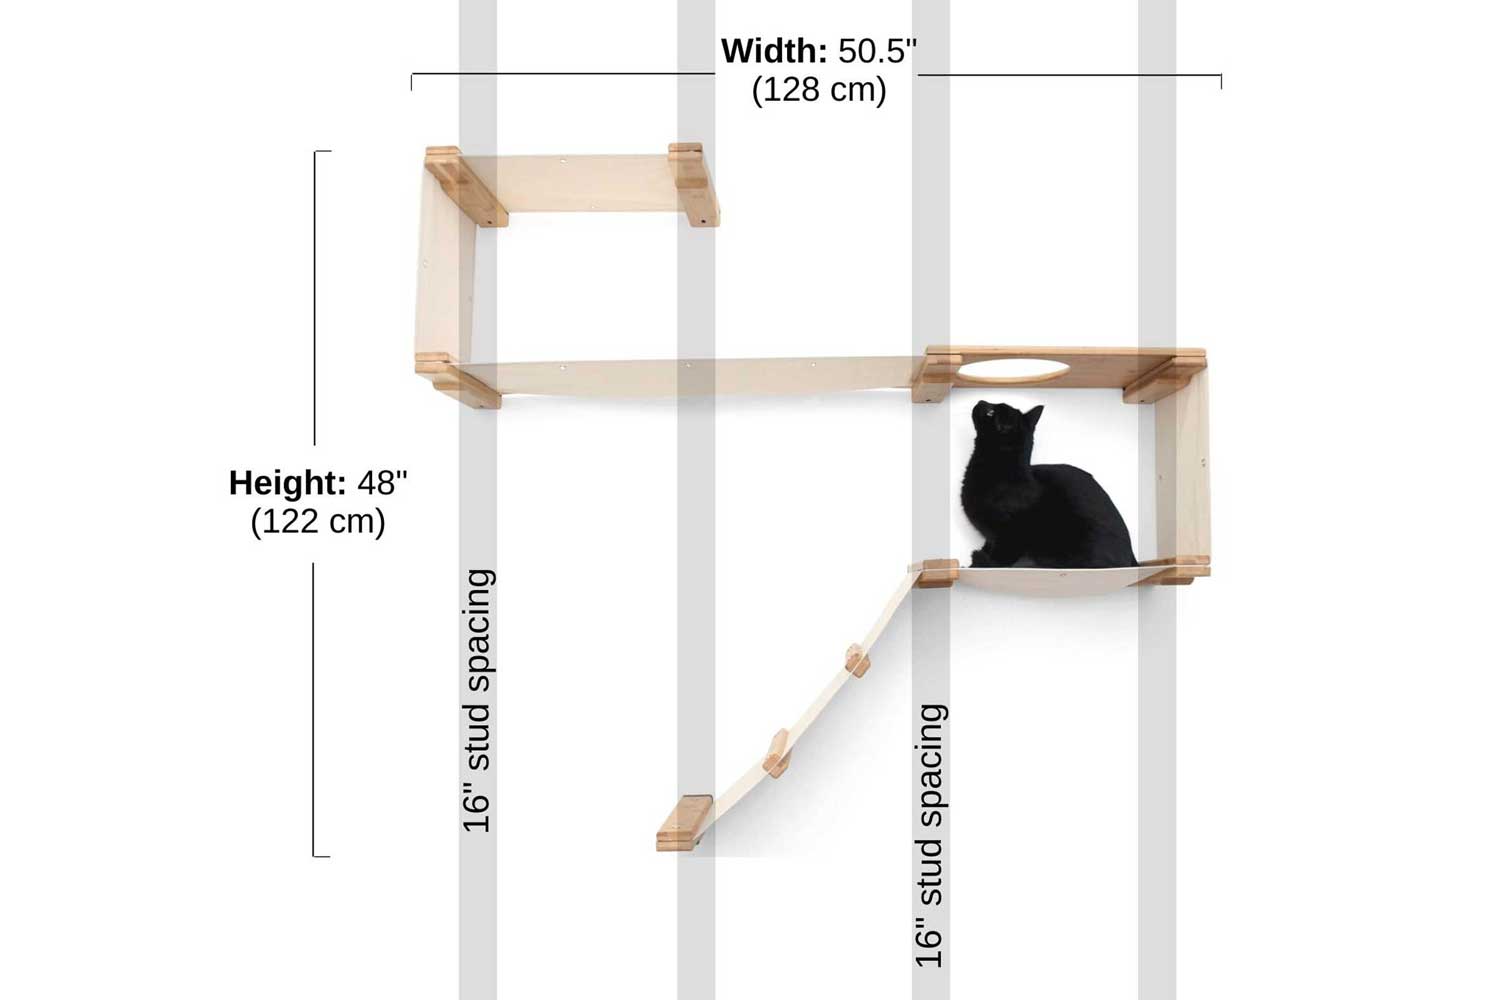 Measurements of the Play Cat Condo